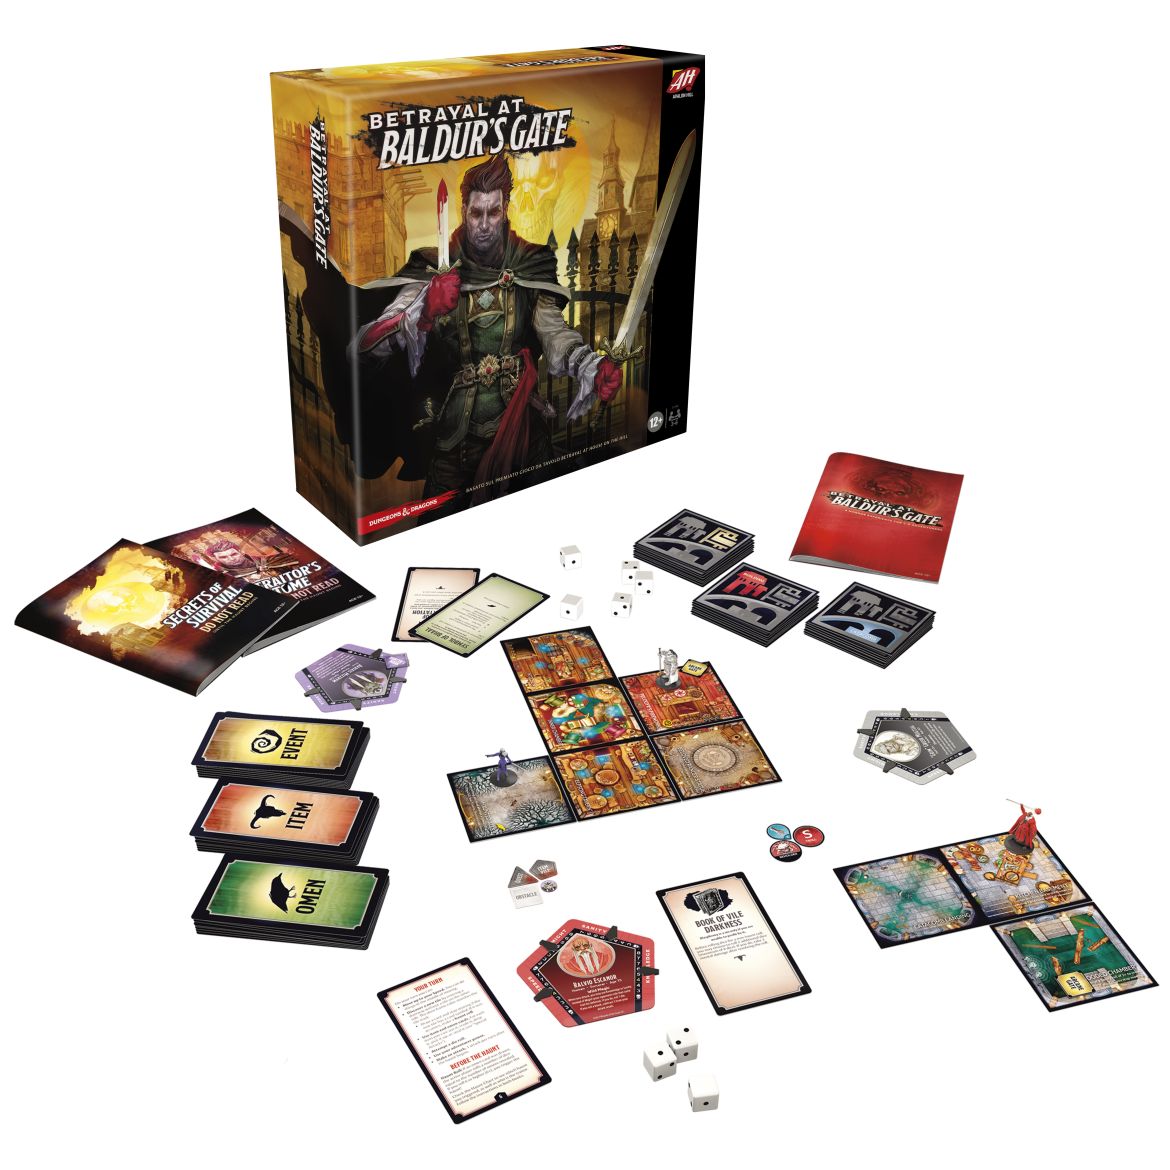 Betrayal at Baldurs Gate nuovi giochi D&D Dungeons and Dragons